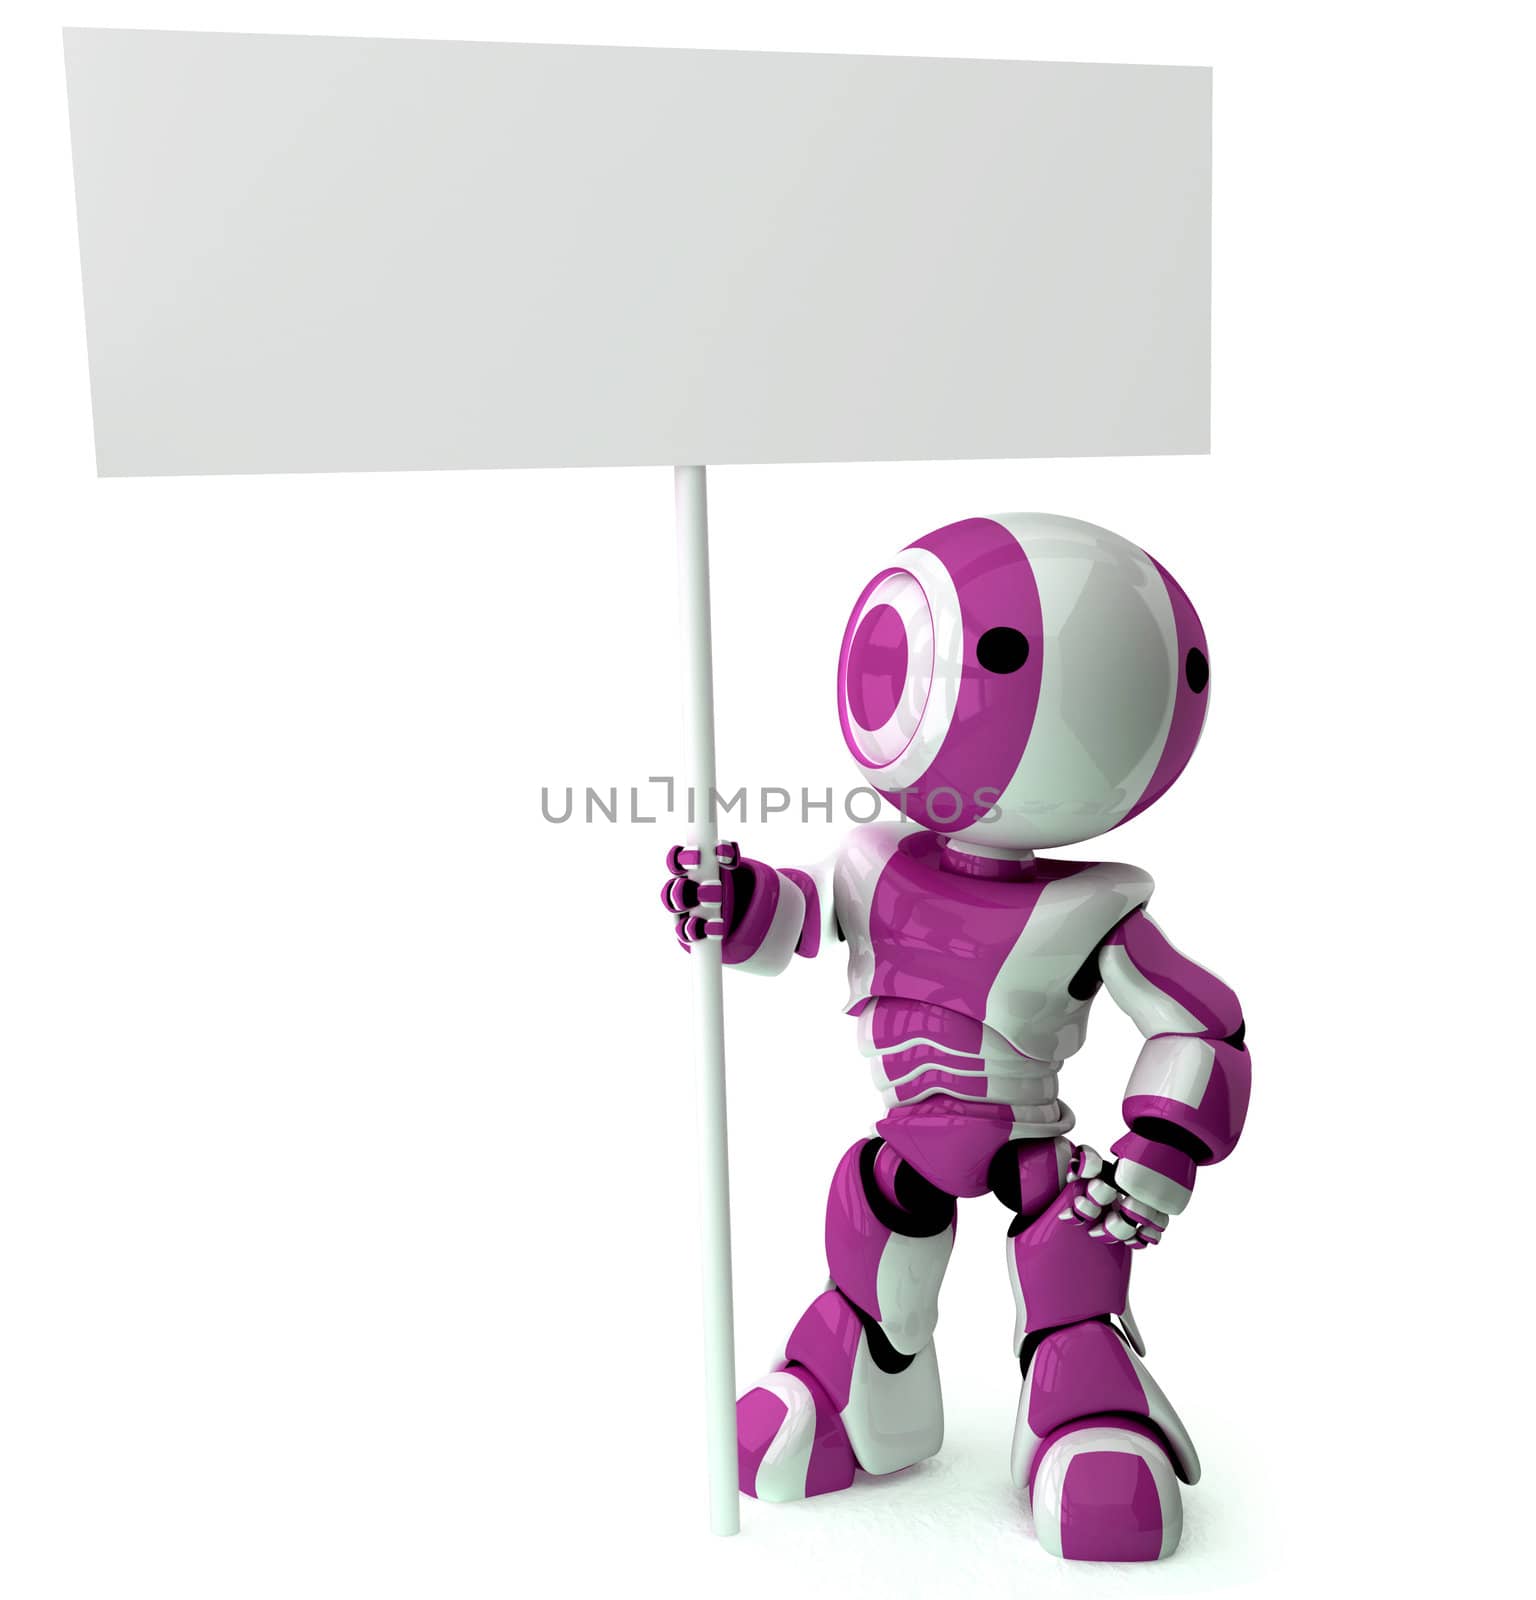 A glossy robot standing holding a sign. Area on sign left blank for your own design.